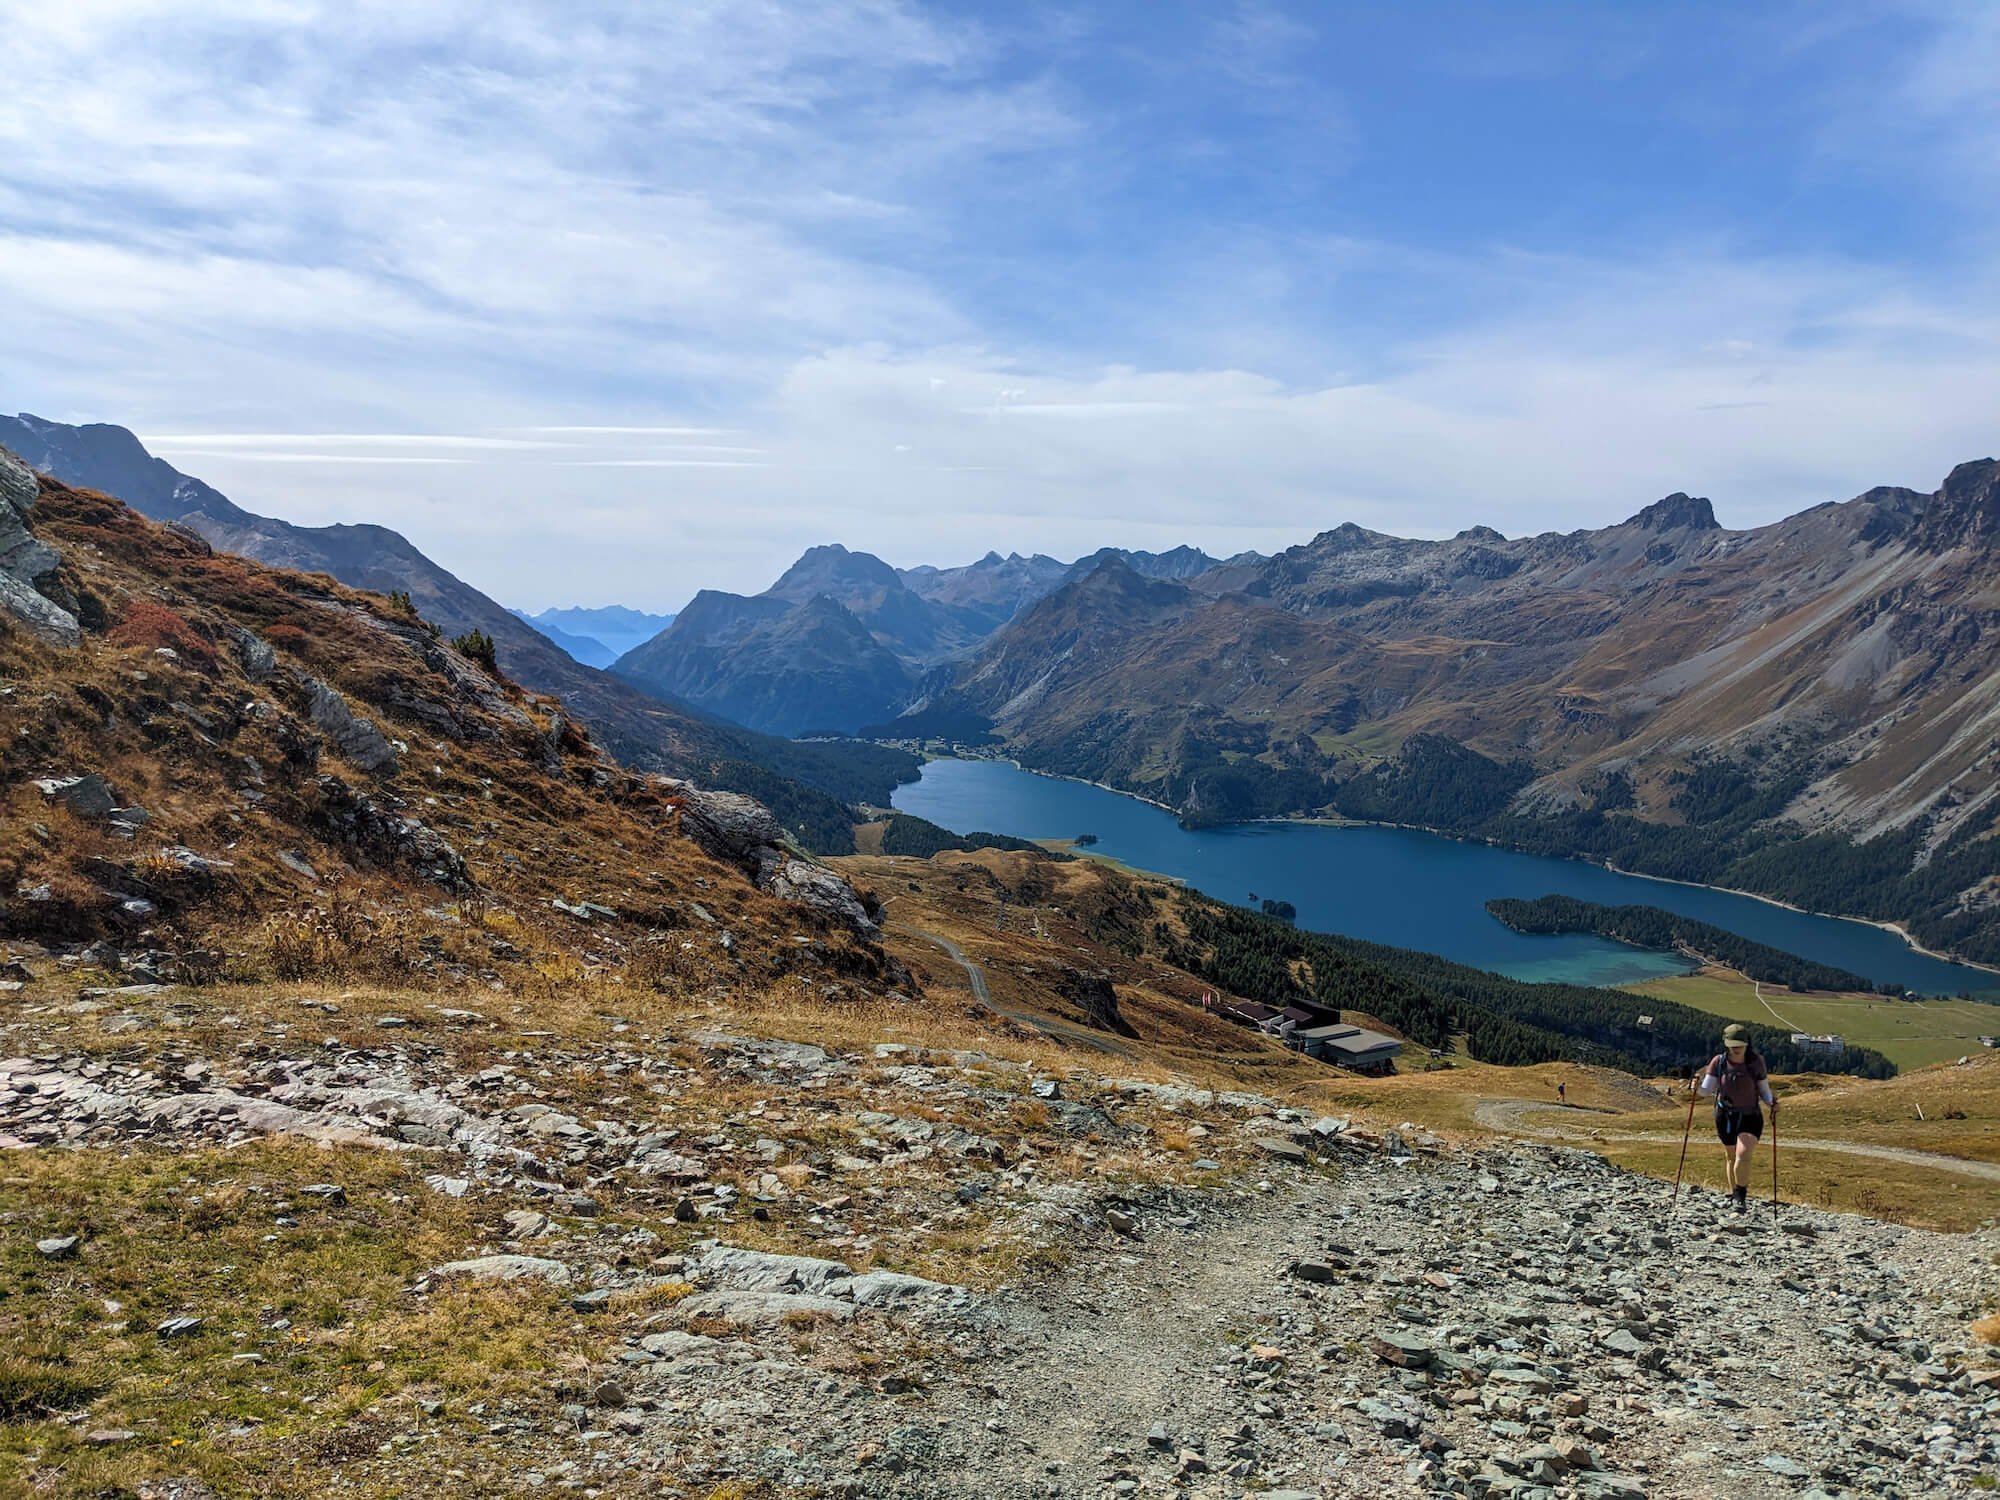 A spectacular view of Lake Sils